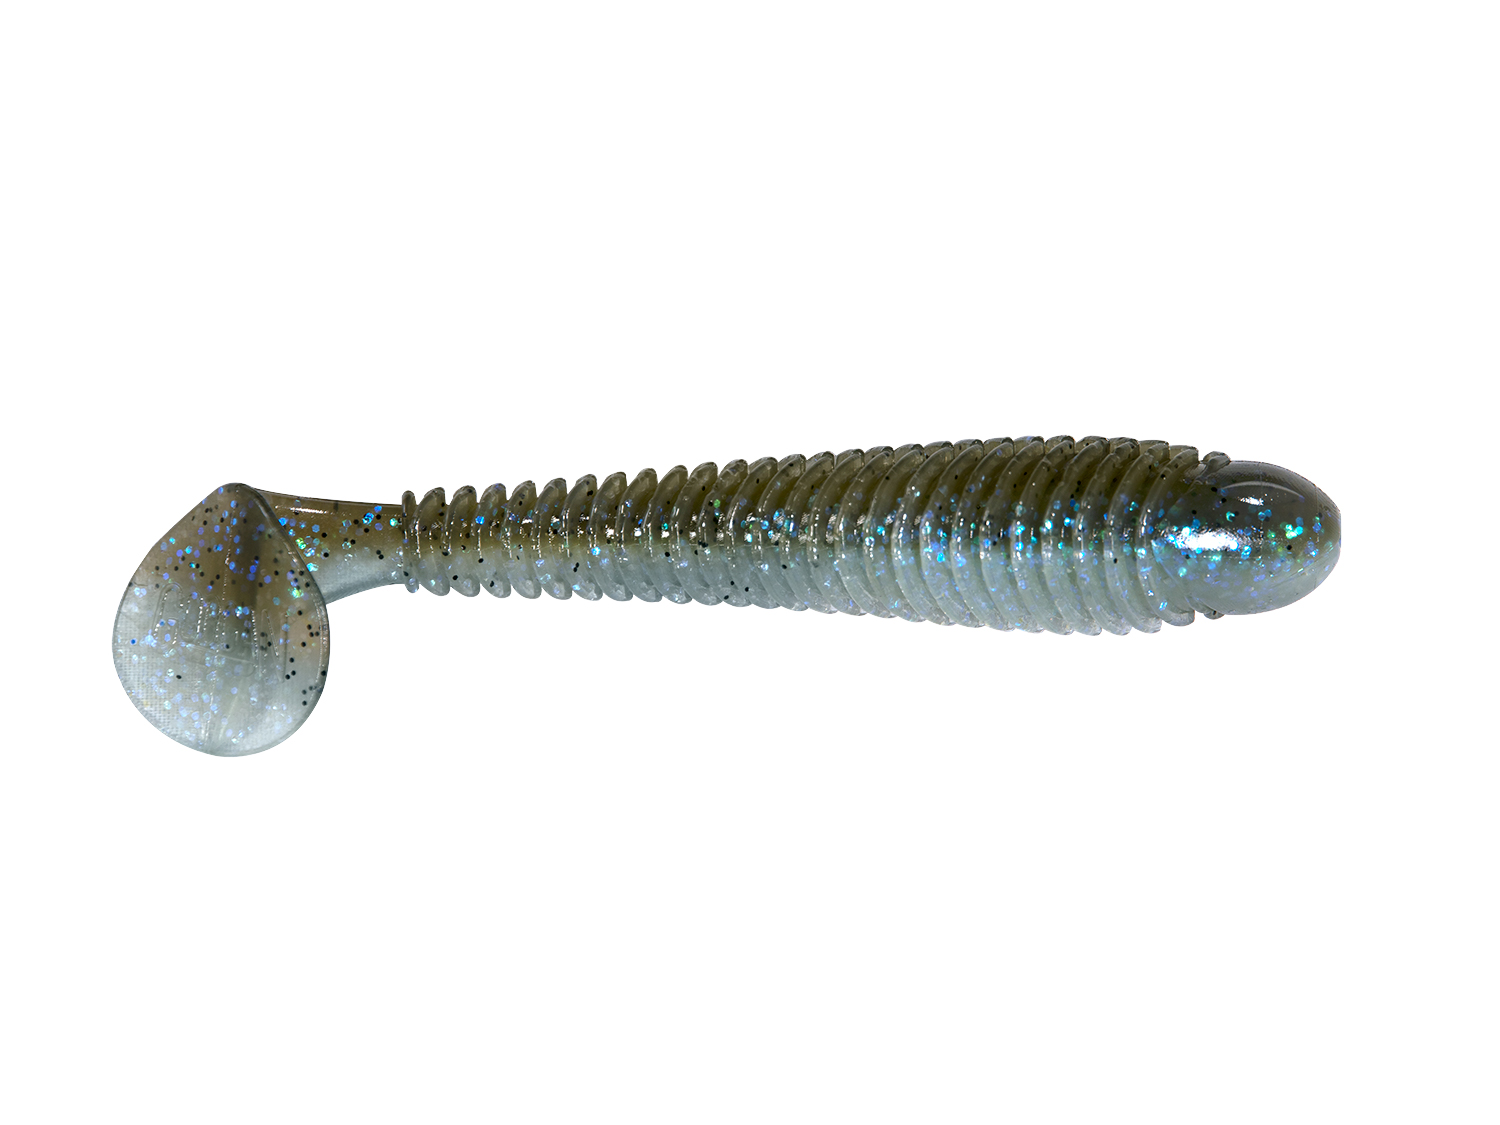 Googan Baits Saucy Swimmer 4.8 Electric Shad 6 Pack